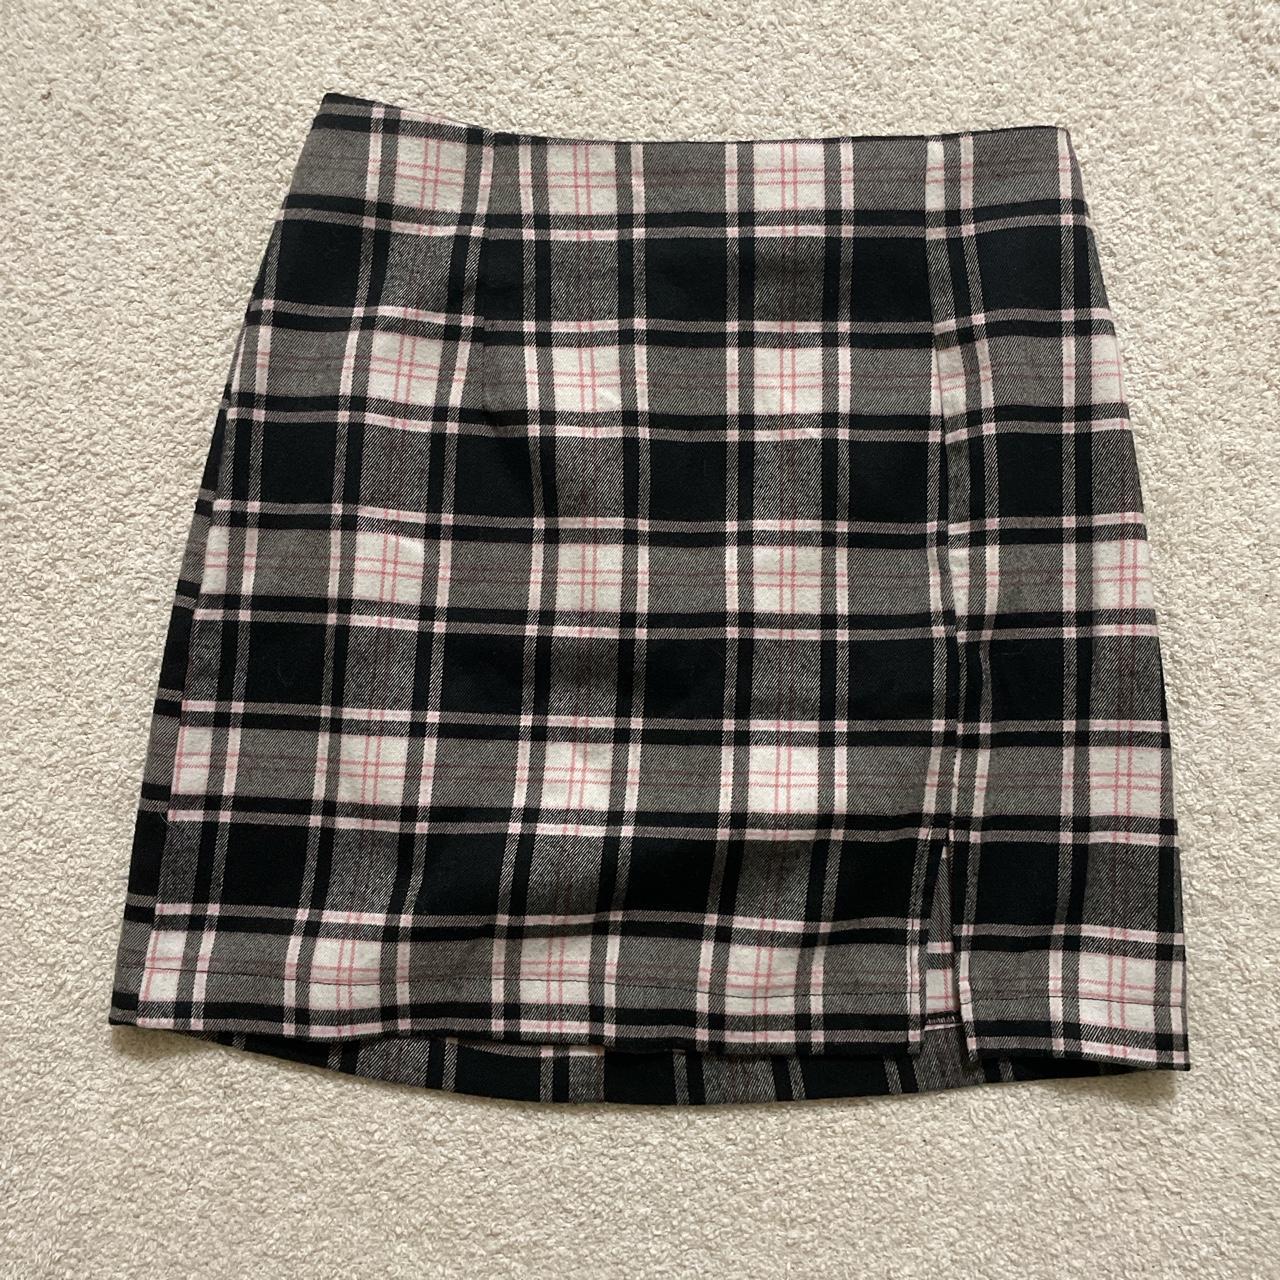 Women’s M Stitch and Pine skirt Black, Pink, and... - Depop